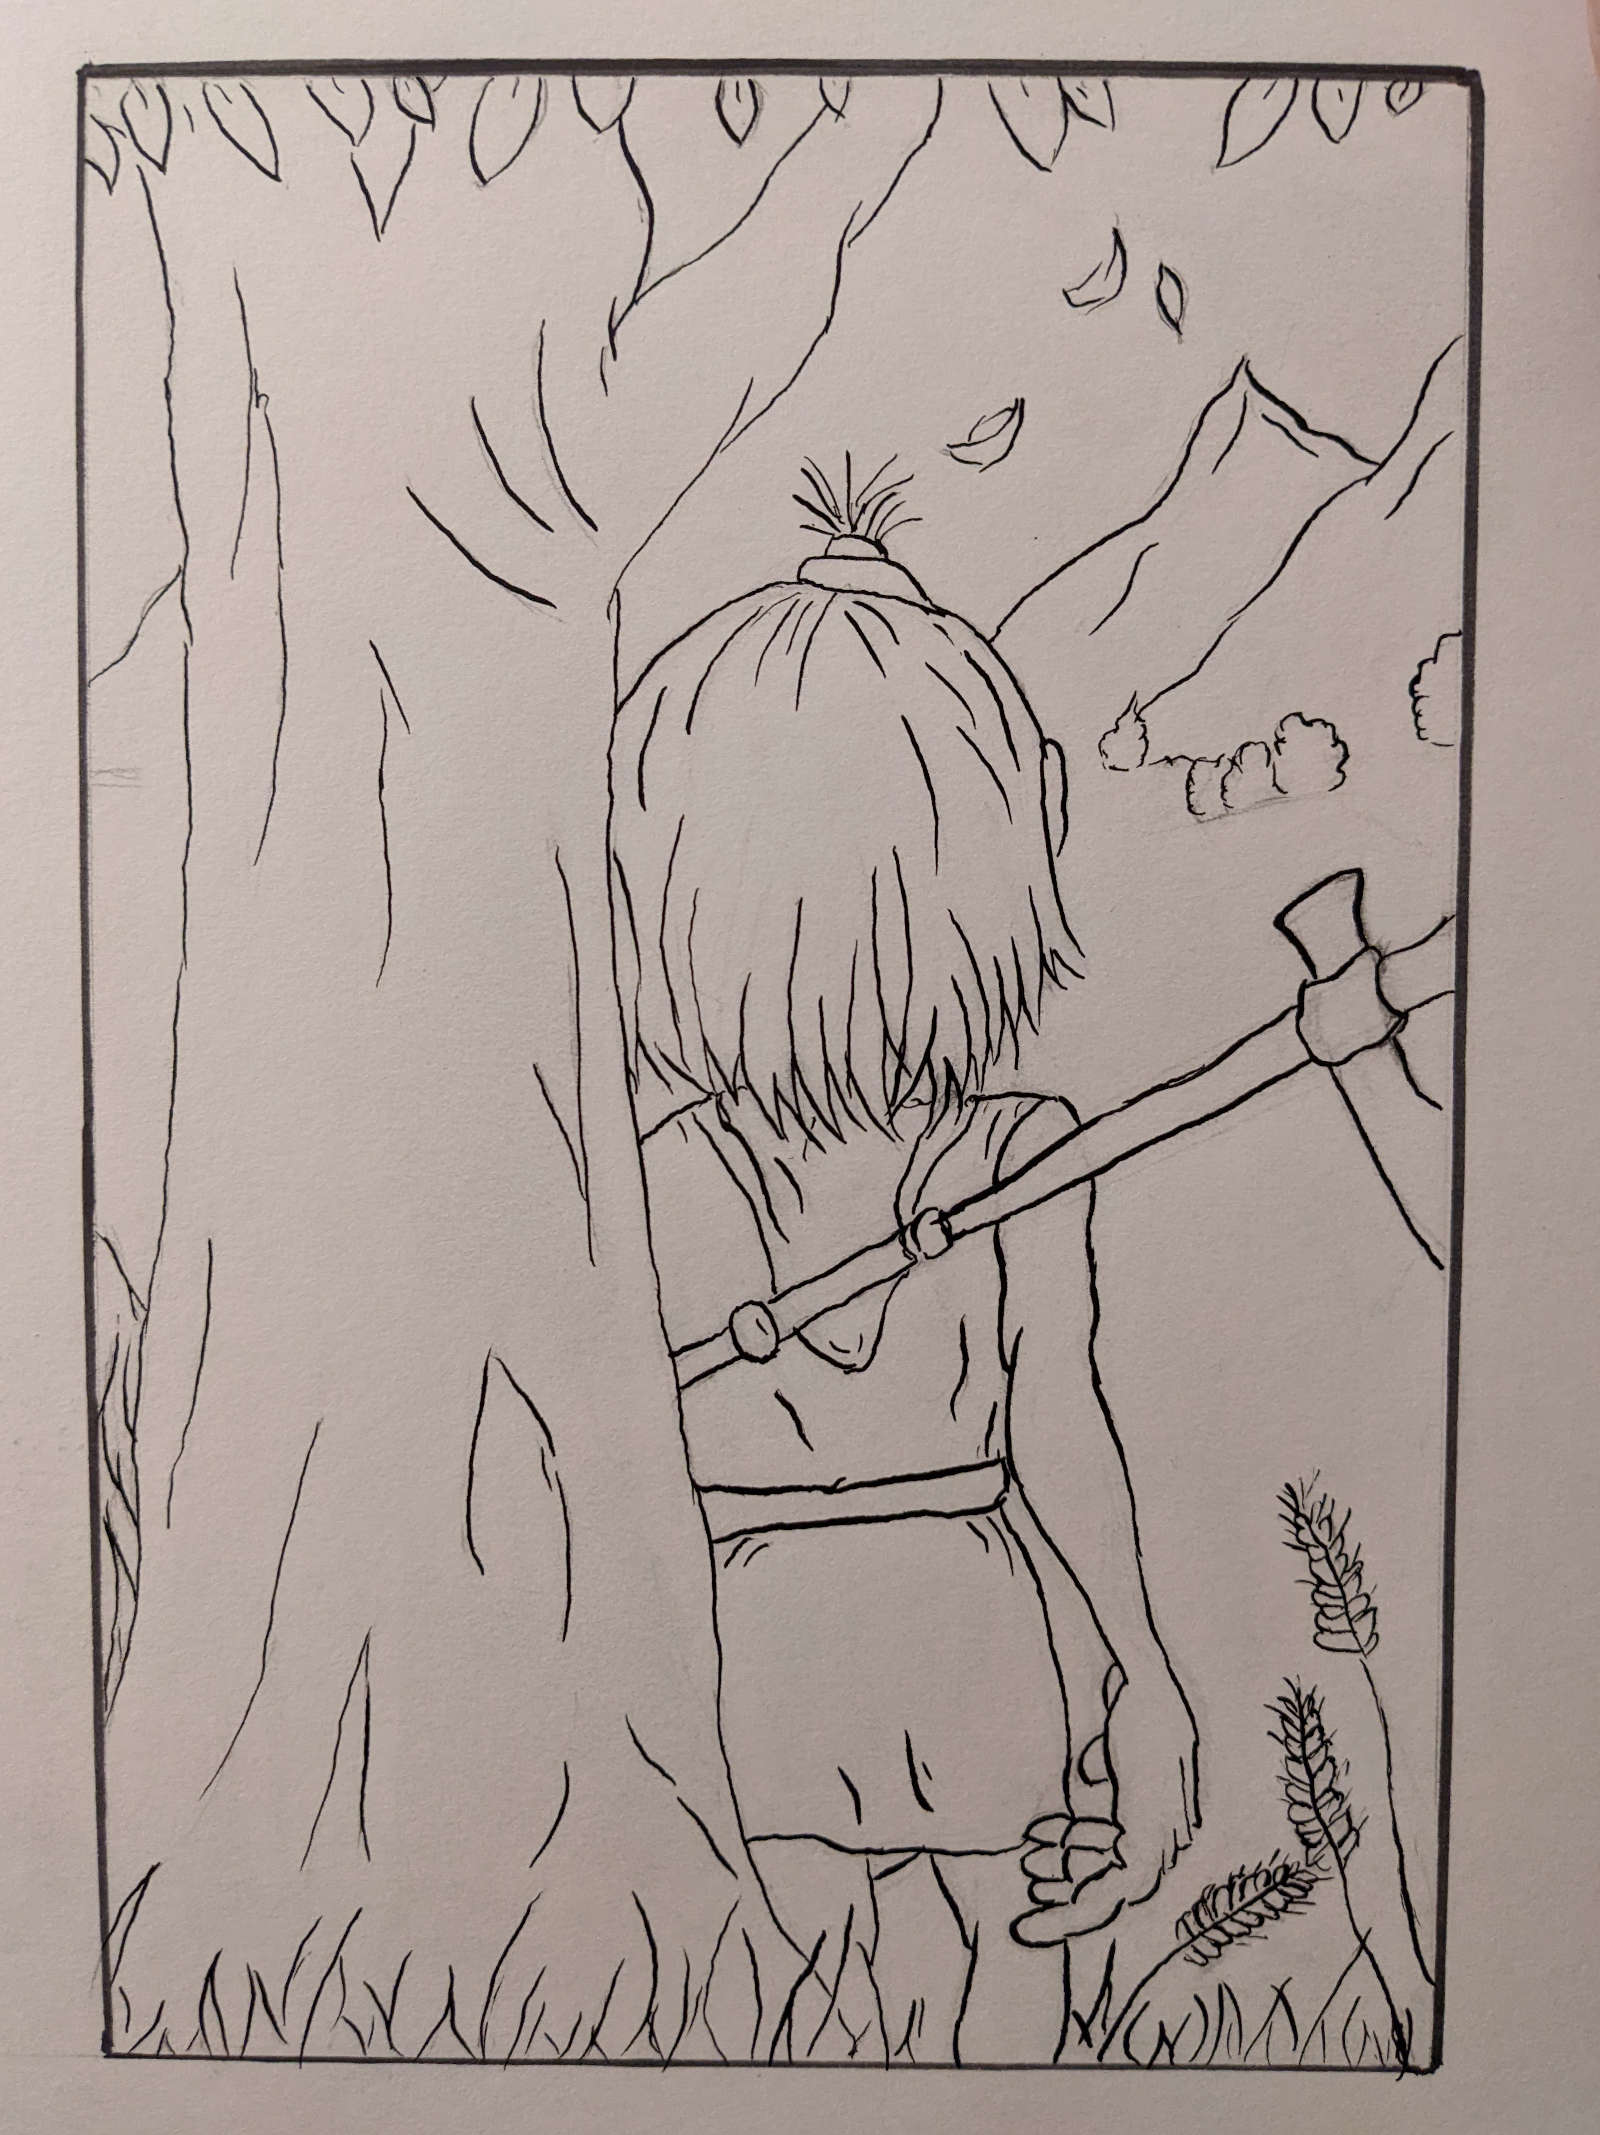 Boy standing in front of tree, looking beyond a field of grass toward mountains. Inked lines on drawing.